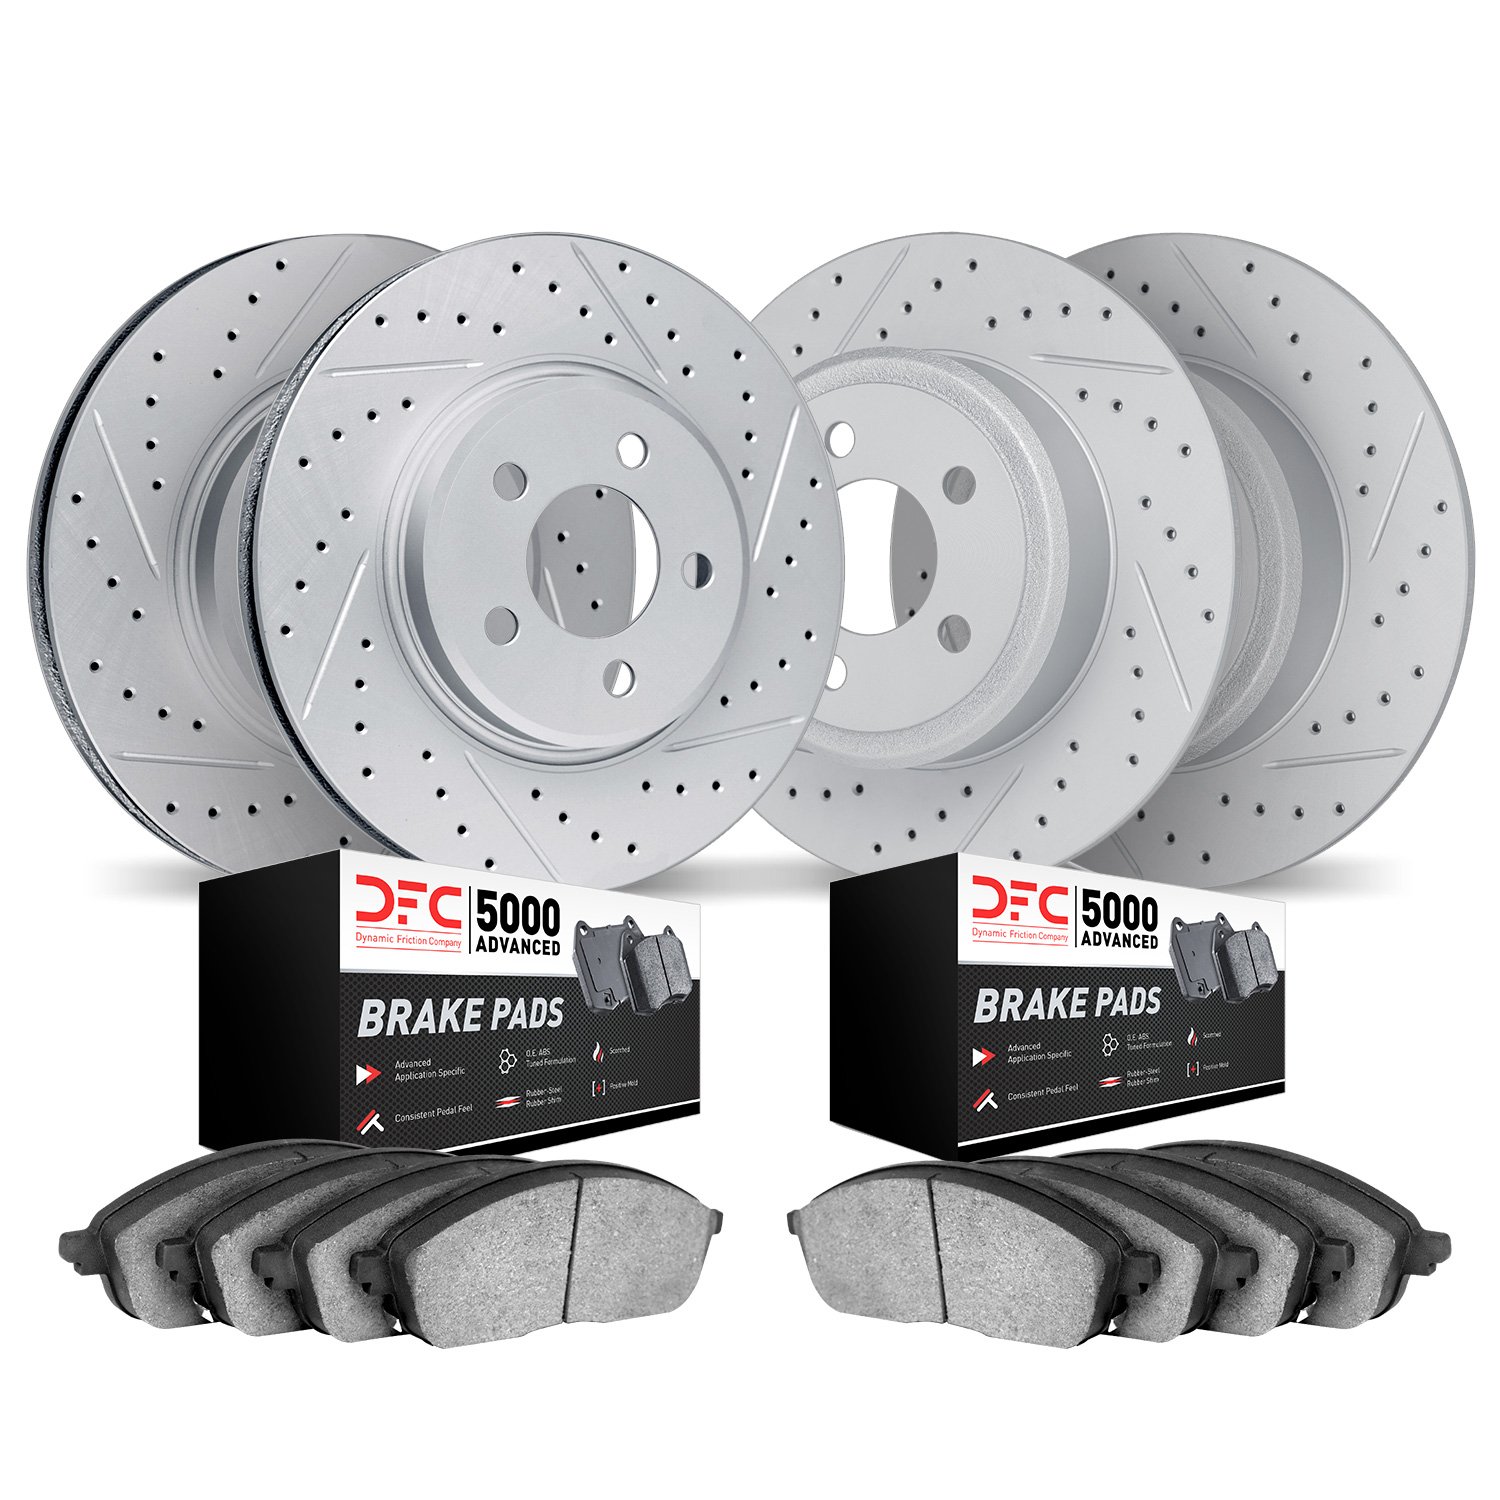 2504-54301 Geoperformance Drilled/Slotted Rotors w/5000 Advanced Brake Pads Kit, 2015-2019 Ford/Lincoln/Mercury/Mazda, Position: